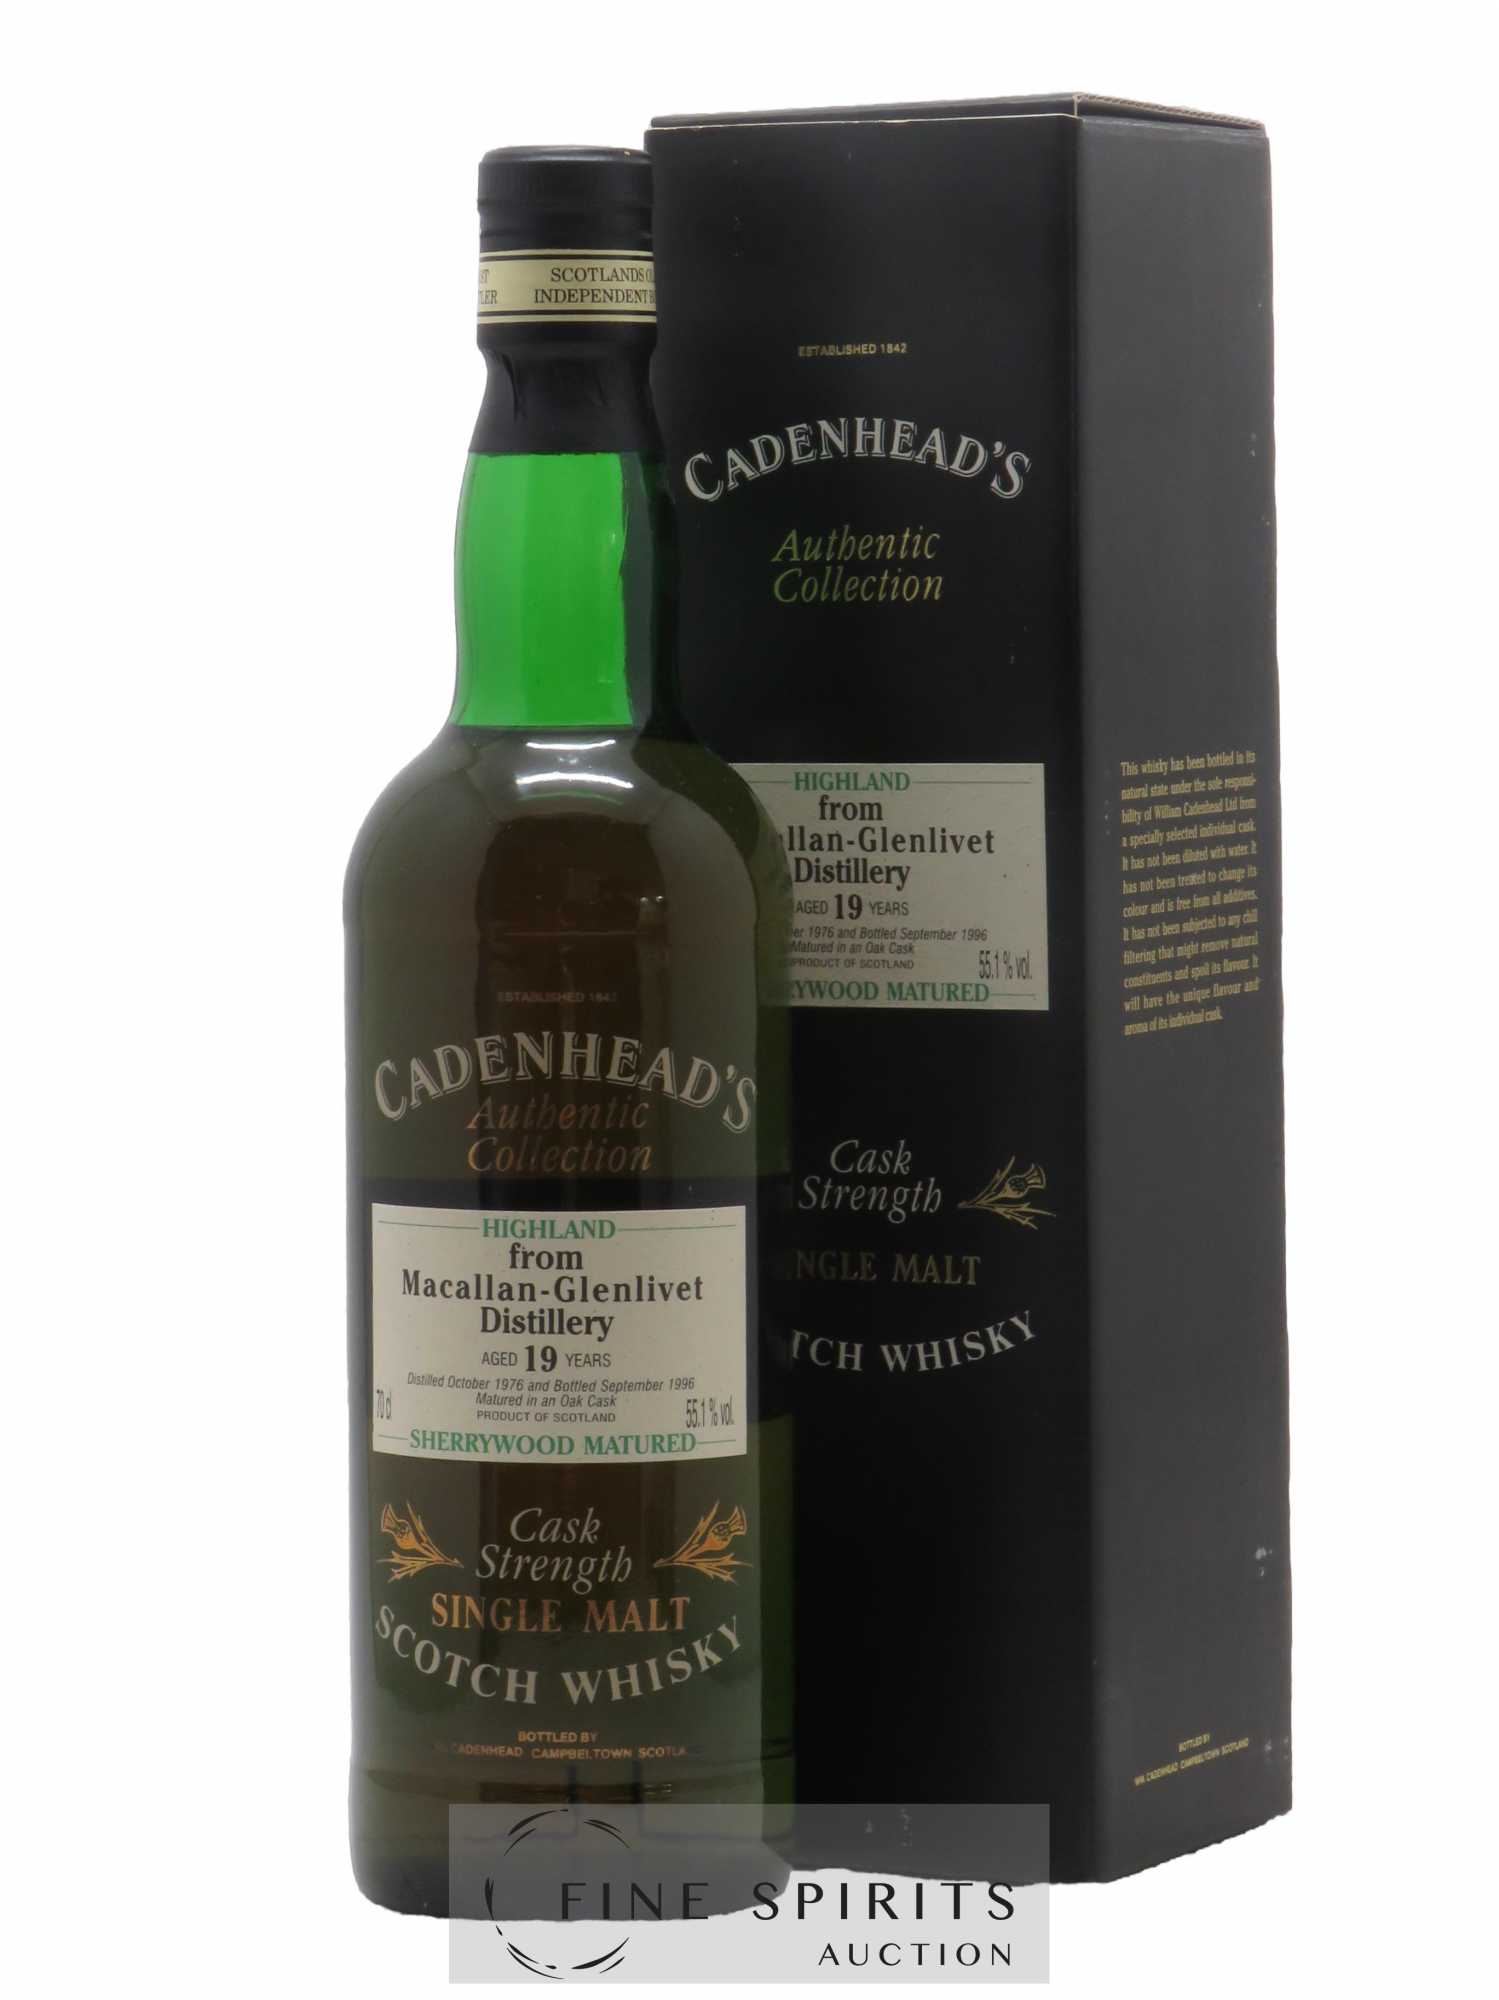 Macallan-Glenlivet 19 years 1976 Cadenhead's Cask Strength - Sherrywood matured - bottled 1996 Authentic Collection